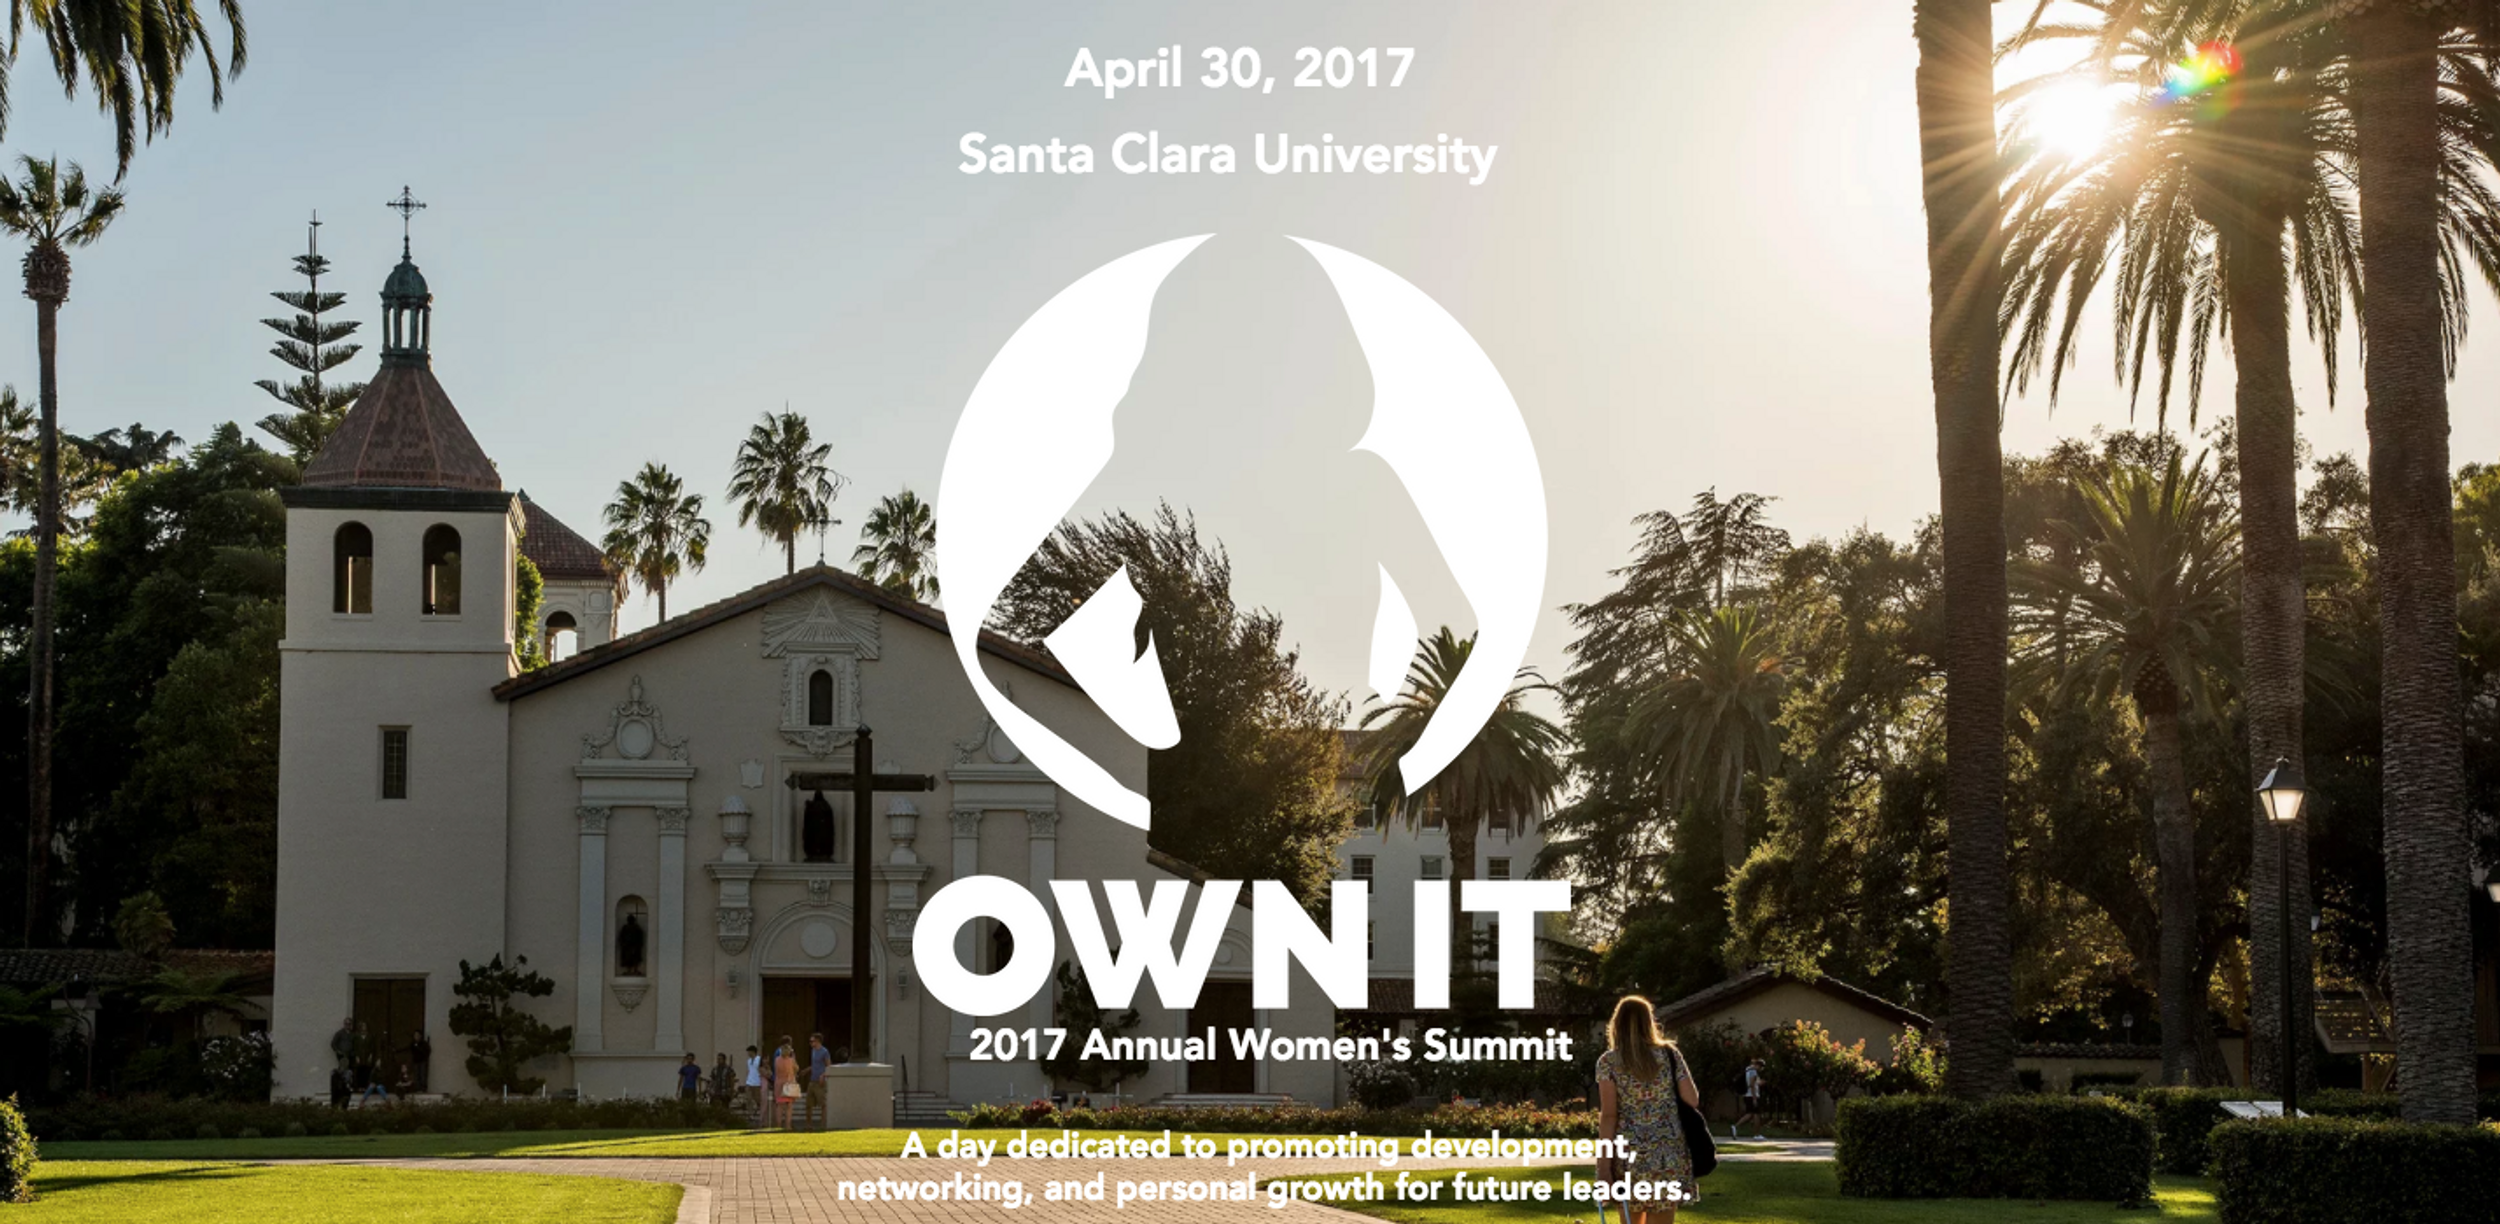 Why The Own It Summit Is So Important